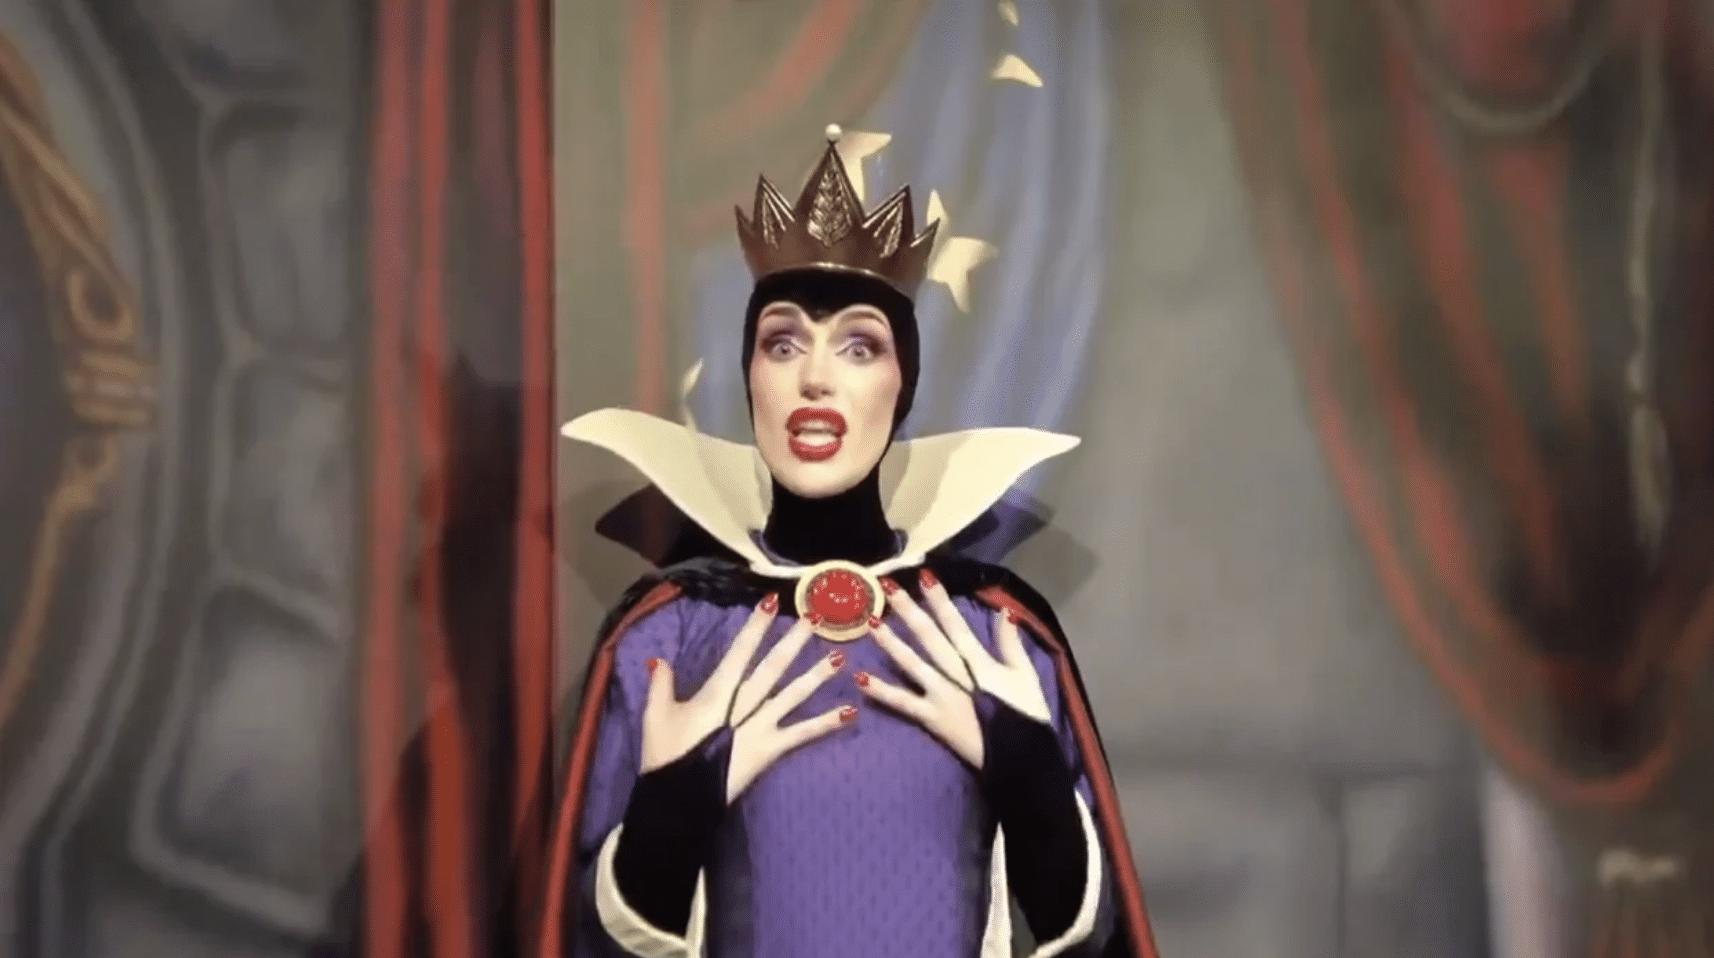 Christian family paid for a meet and greet with Disney’s Evil Queen but wound up with ‘a man dressed in drag’